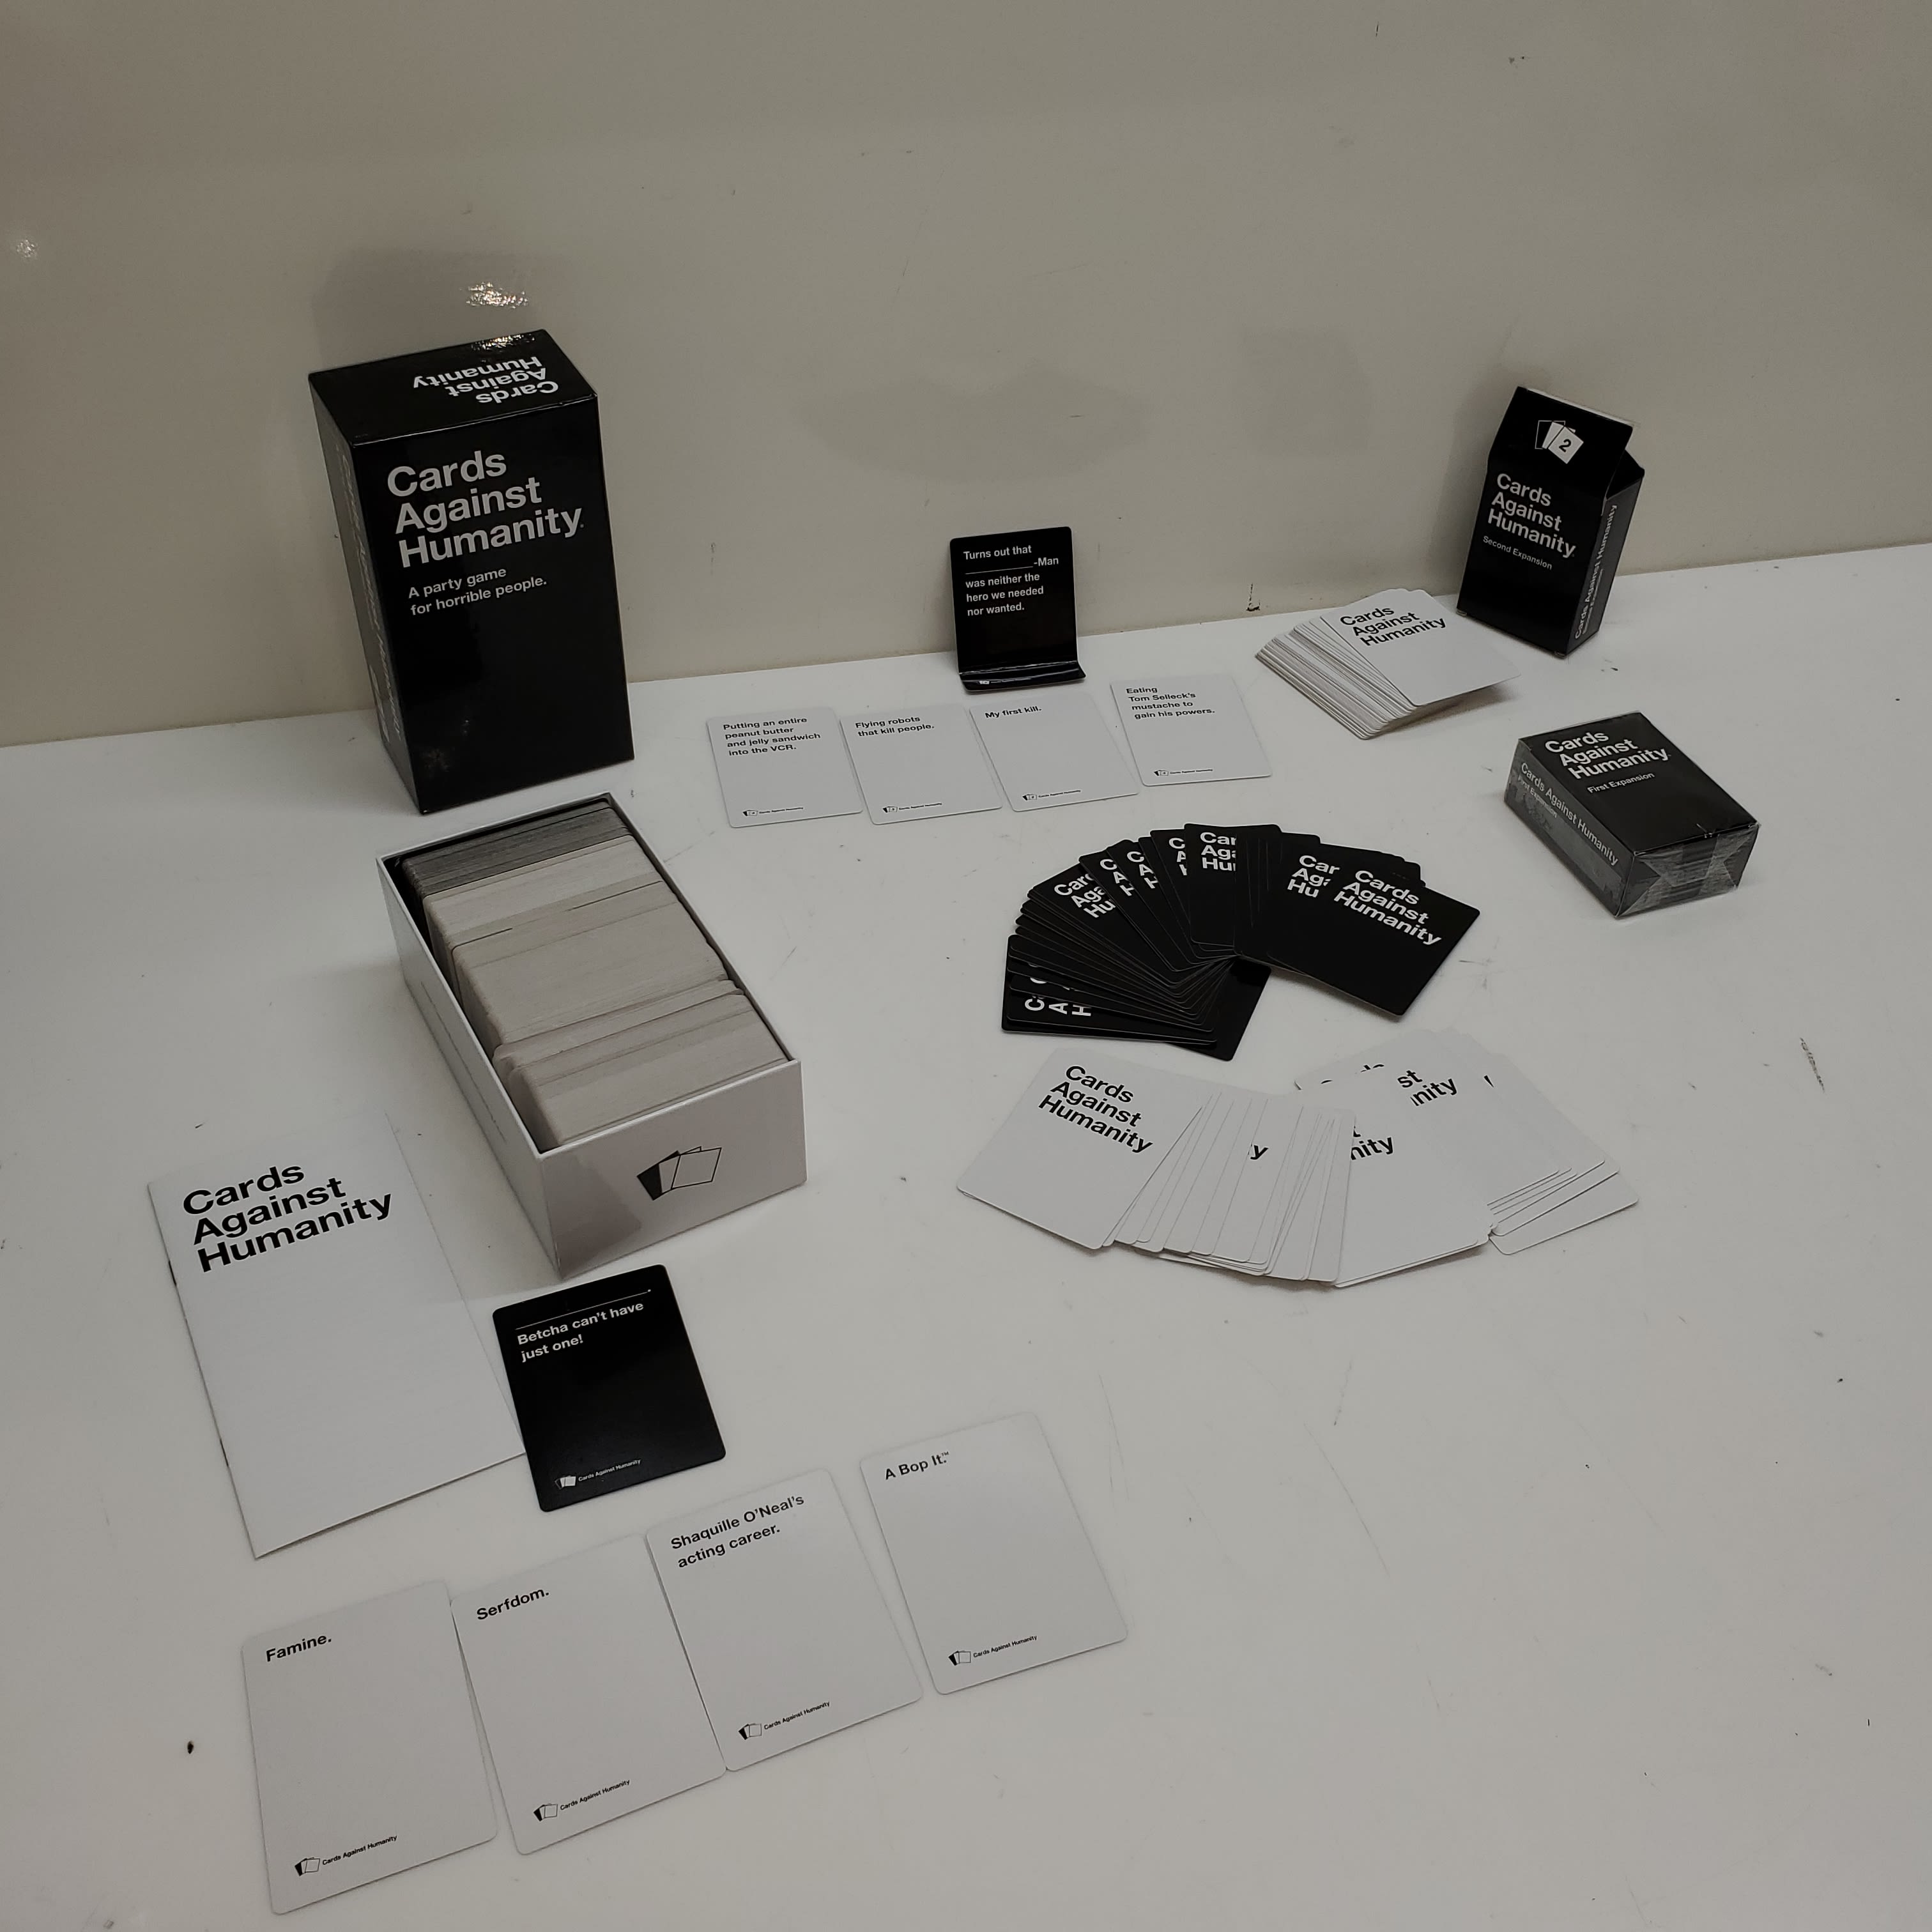 Cards Against Humanity gives out $1,000 checks to their poorest